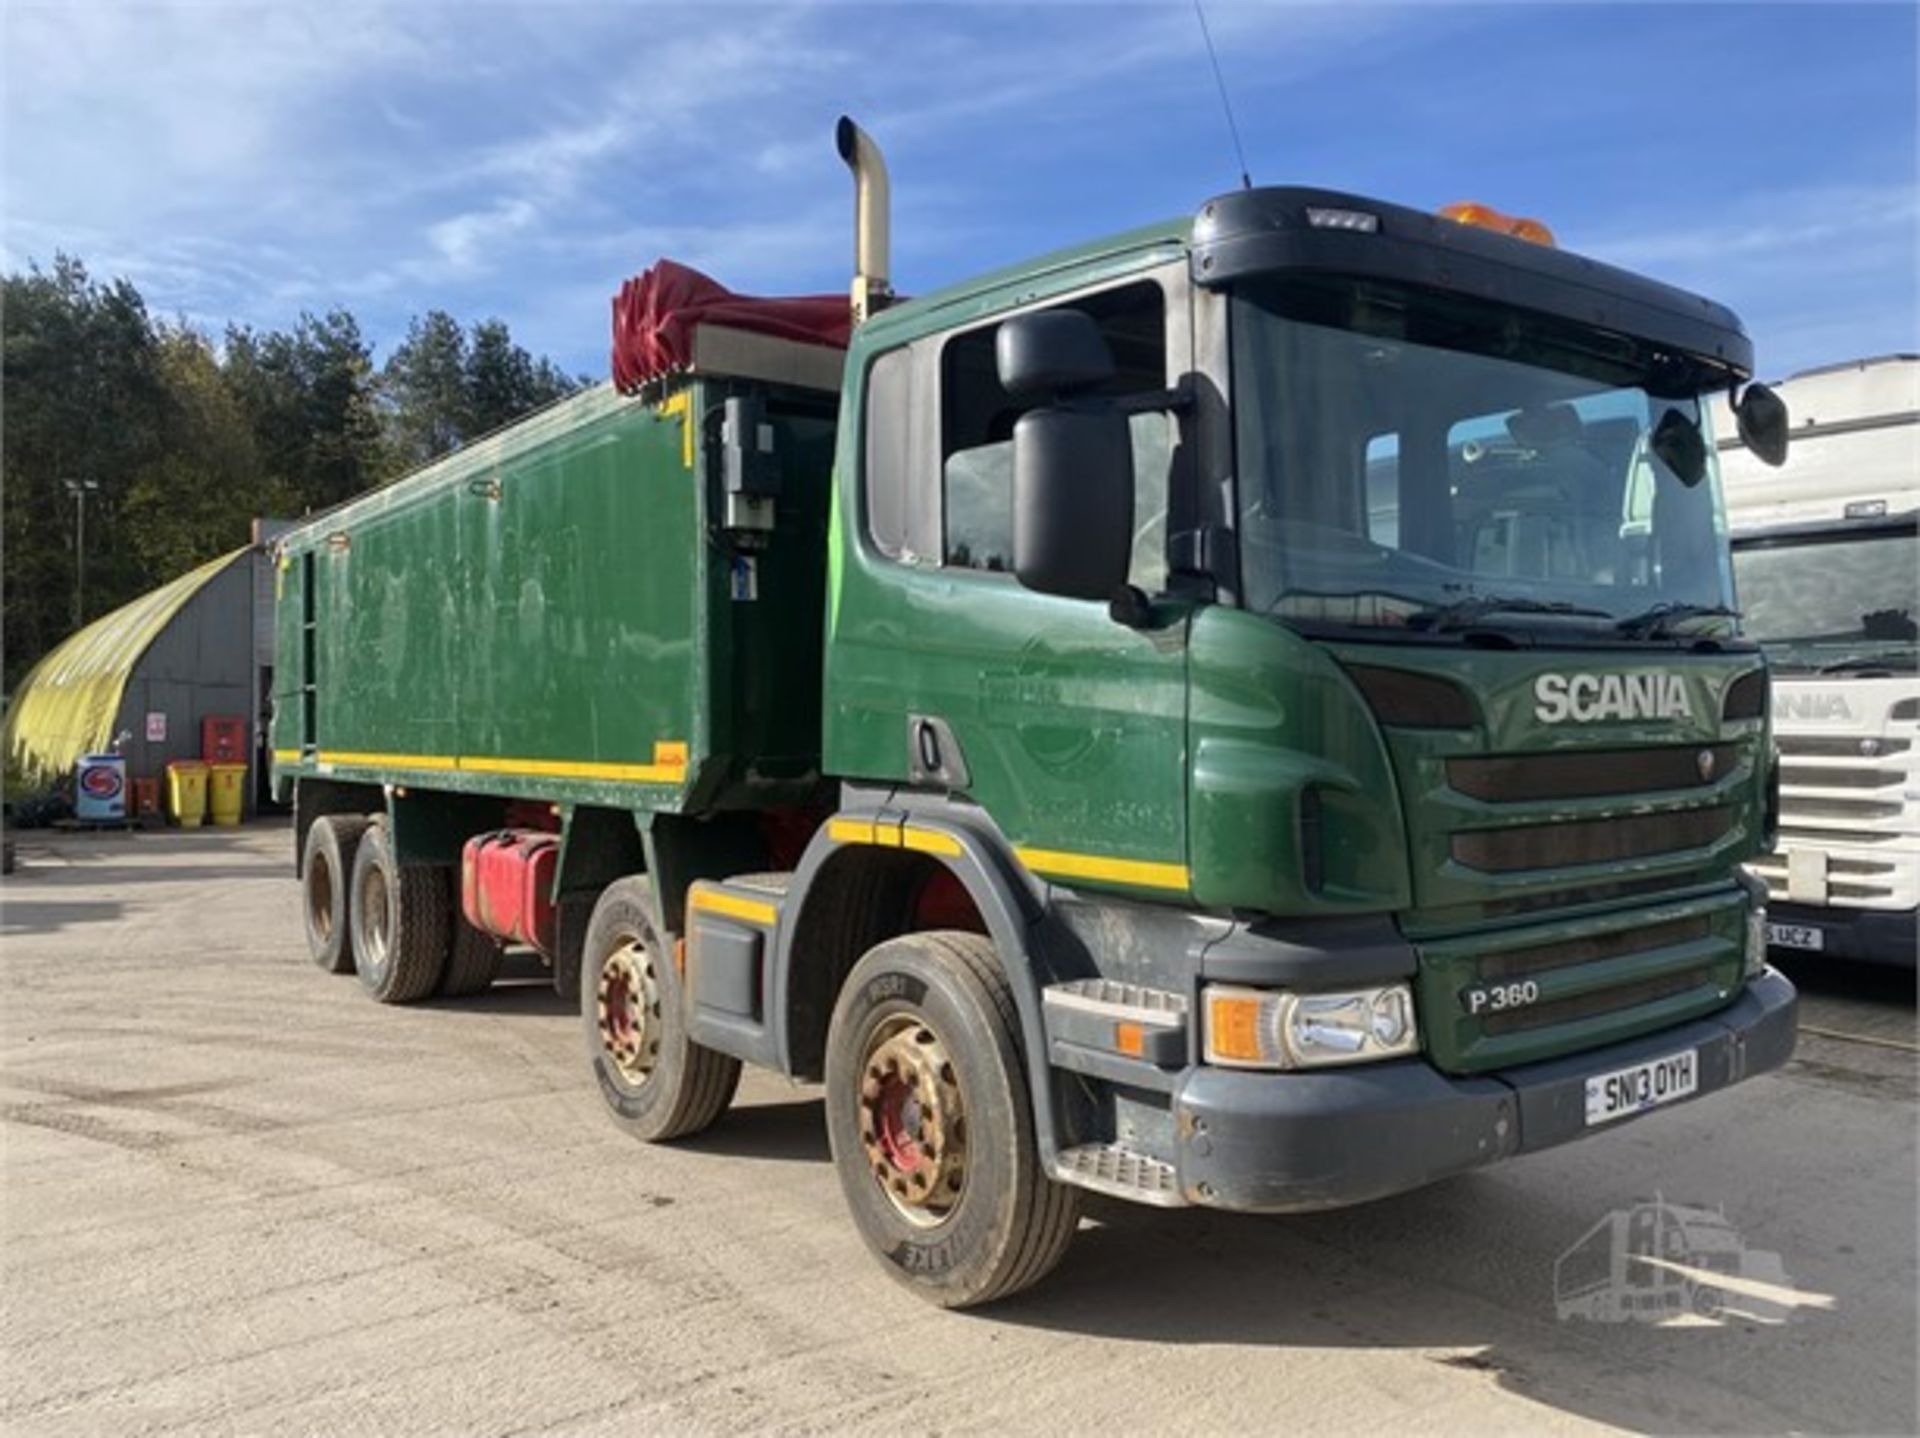 SCANIA P360 TIPPER TRUCK - Image 3 of 17